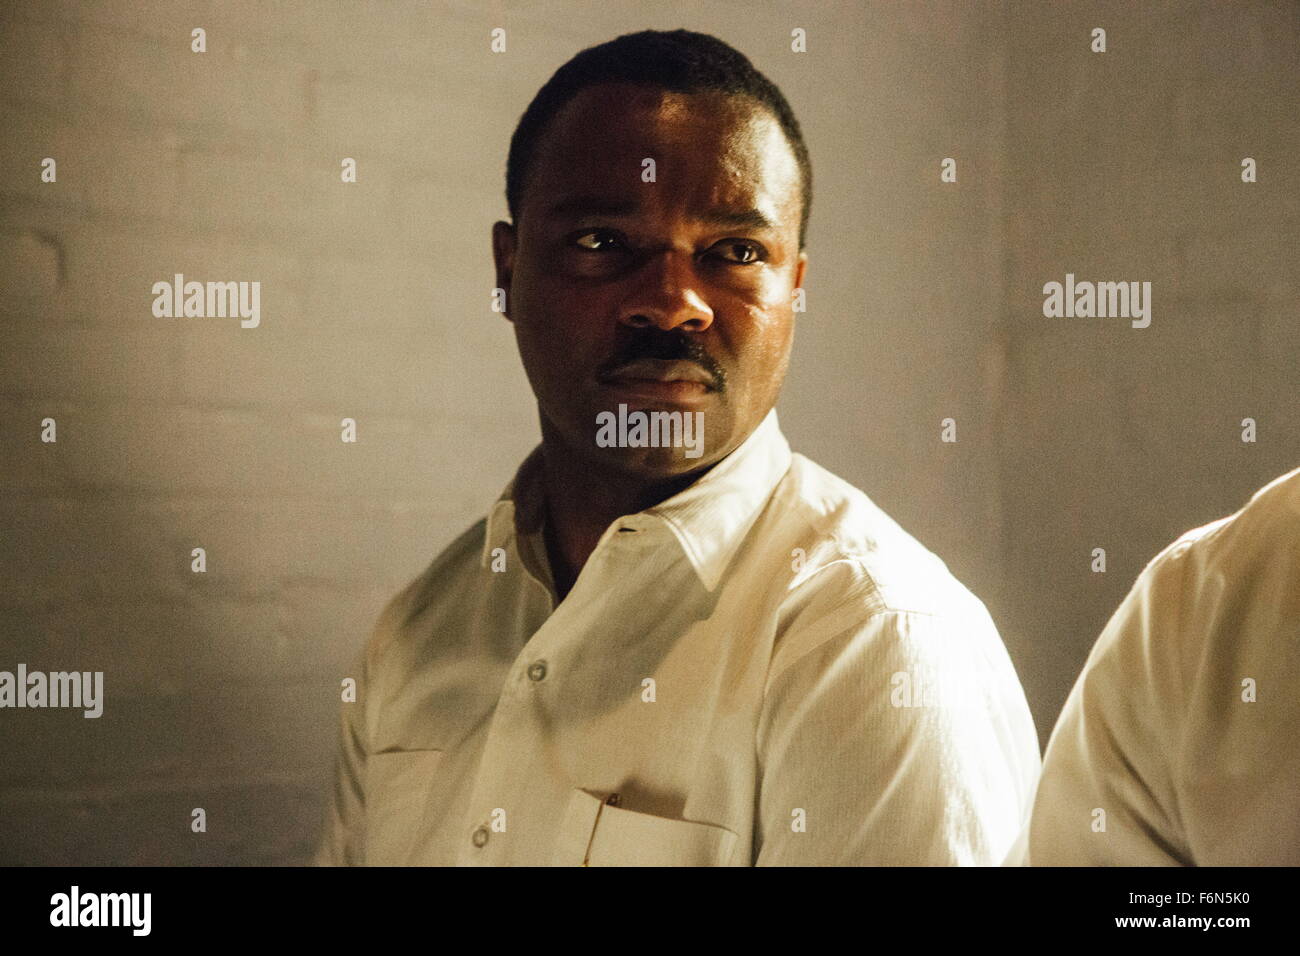 RELEASE DATE: January 9, 2015 TITLE: Selma STUDIO: Paramount Pictures DIRECTOR: Ava DuVernay PLOT: Martin Luther King and the civil rights marches of Selma, Alabama, that changed the United States for ever. PICTURED: DAVID OYEOWO as Martin Luther King Jr Stock Photo